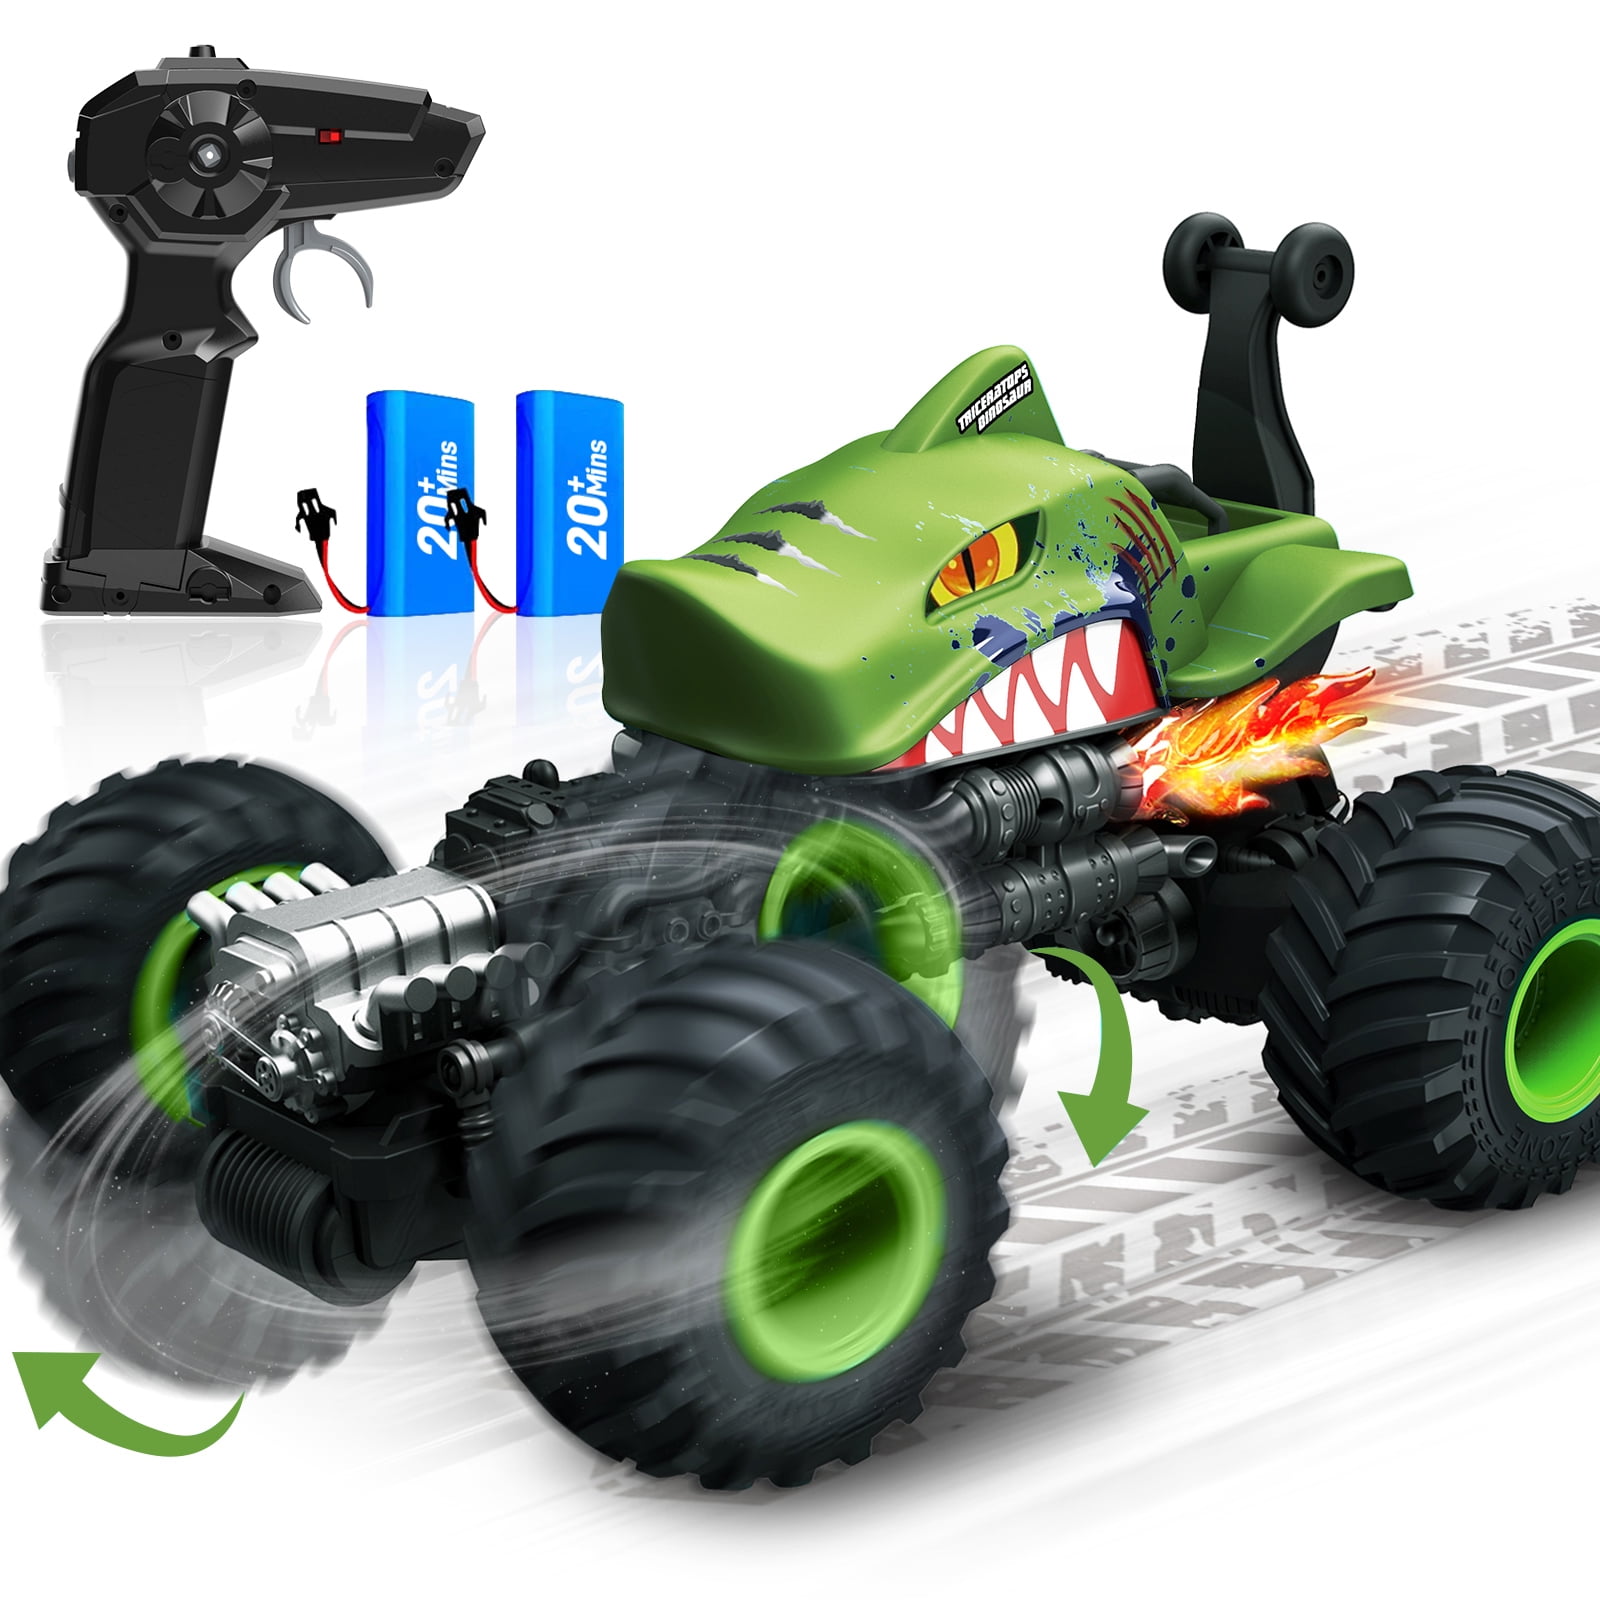 Wltoys 20409 rc Car Cross-country Electric SUV 4WD Monster Truck